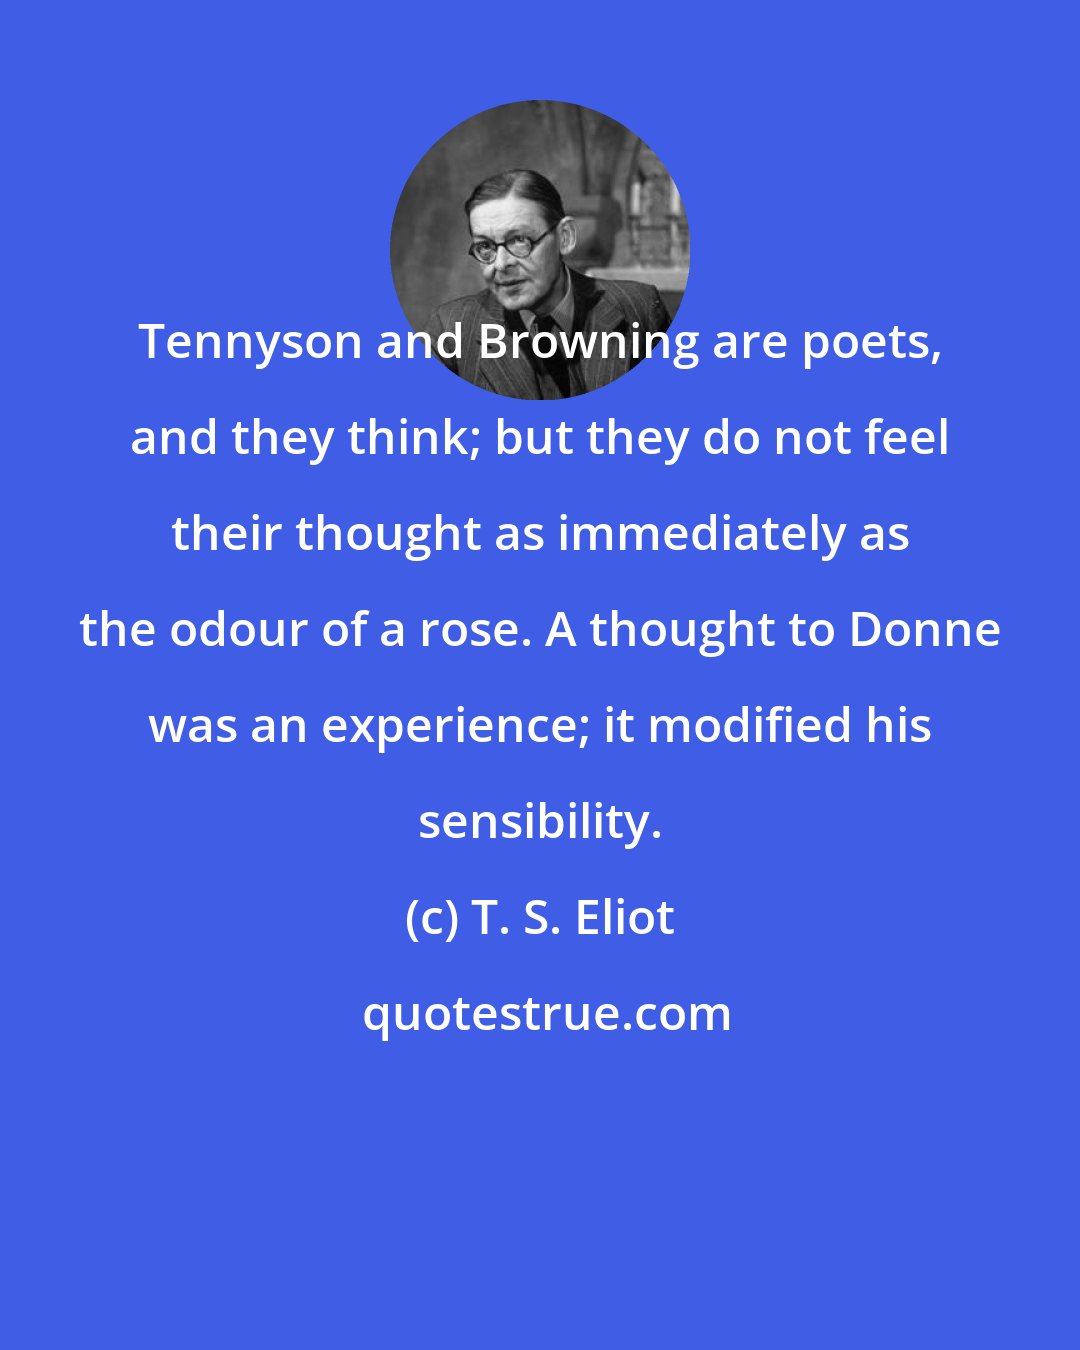 T. S. Eliot: Tennyson and Browning are poets, and they think; but they do not feel their thought as immediately as the odour of a rose. A thought to Donne was an experience; it modified his sensibility.